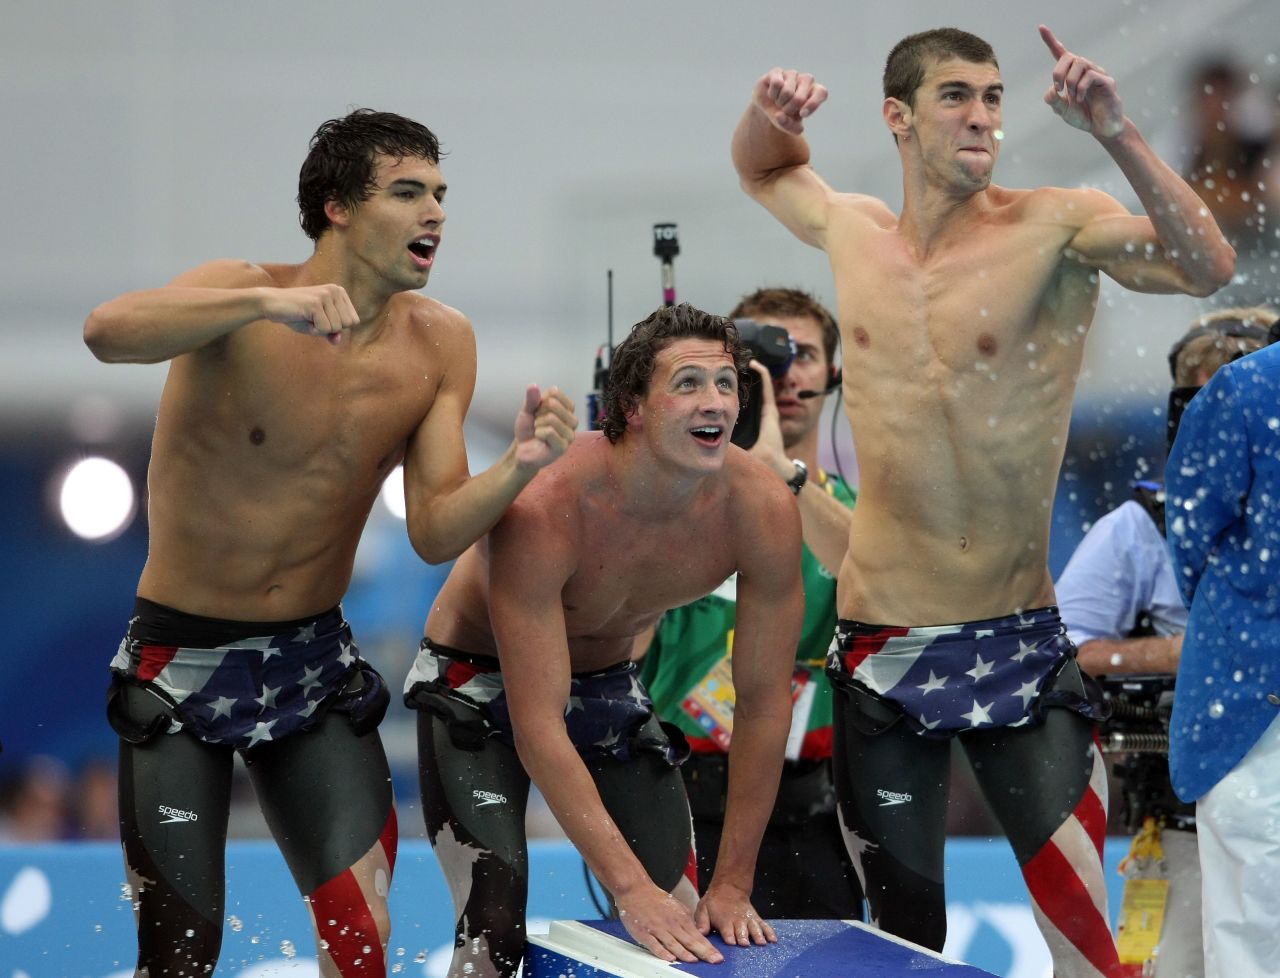 Phelps shouts encouragement to teammates in the 4x200 freestyle in Beijing.